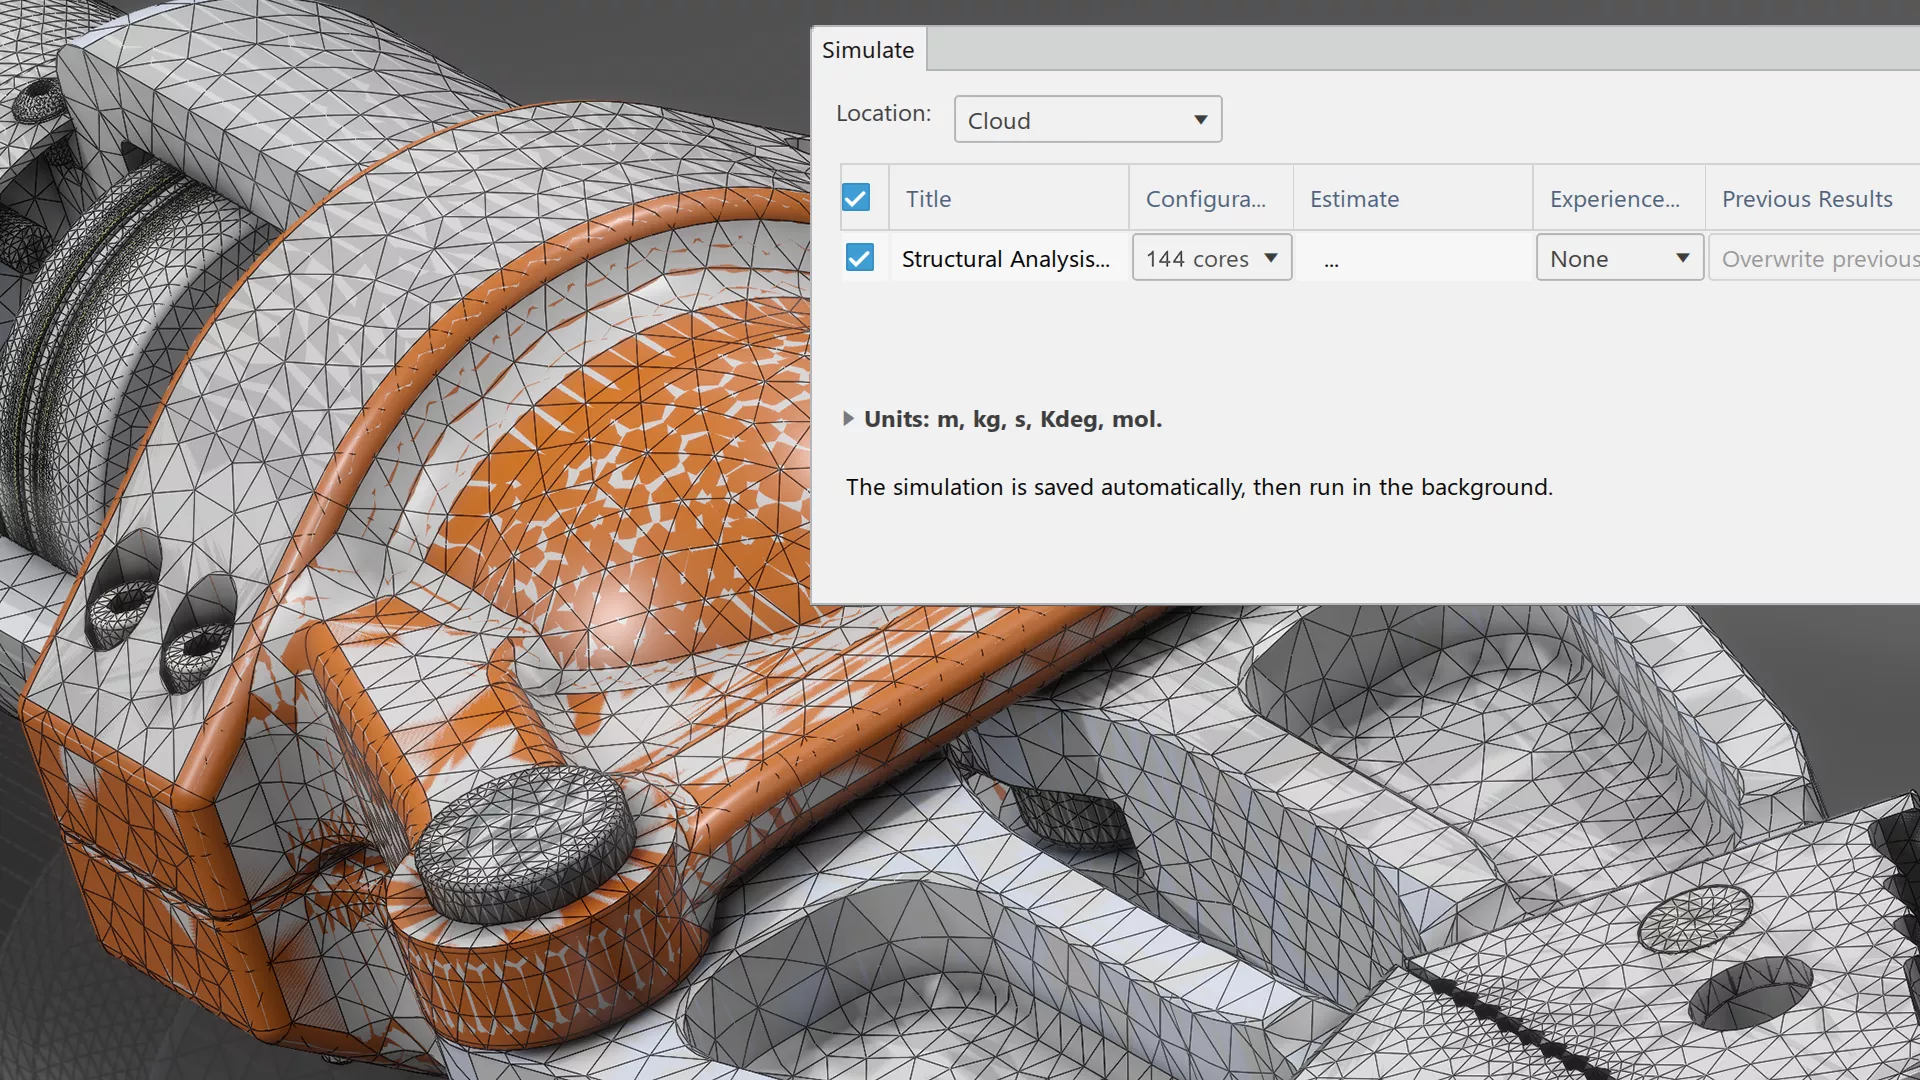 Cloud compute for FEA & CFD will transform your simulation capabilities and productivity.